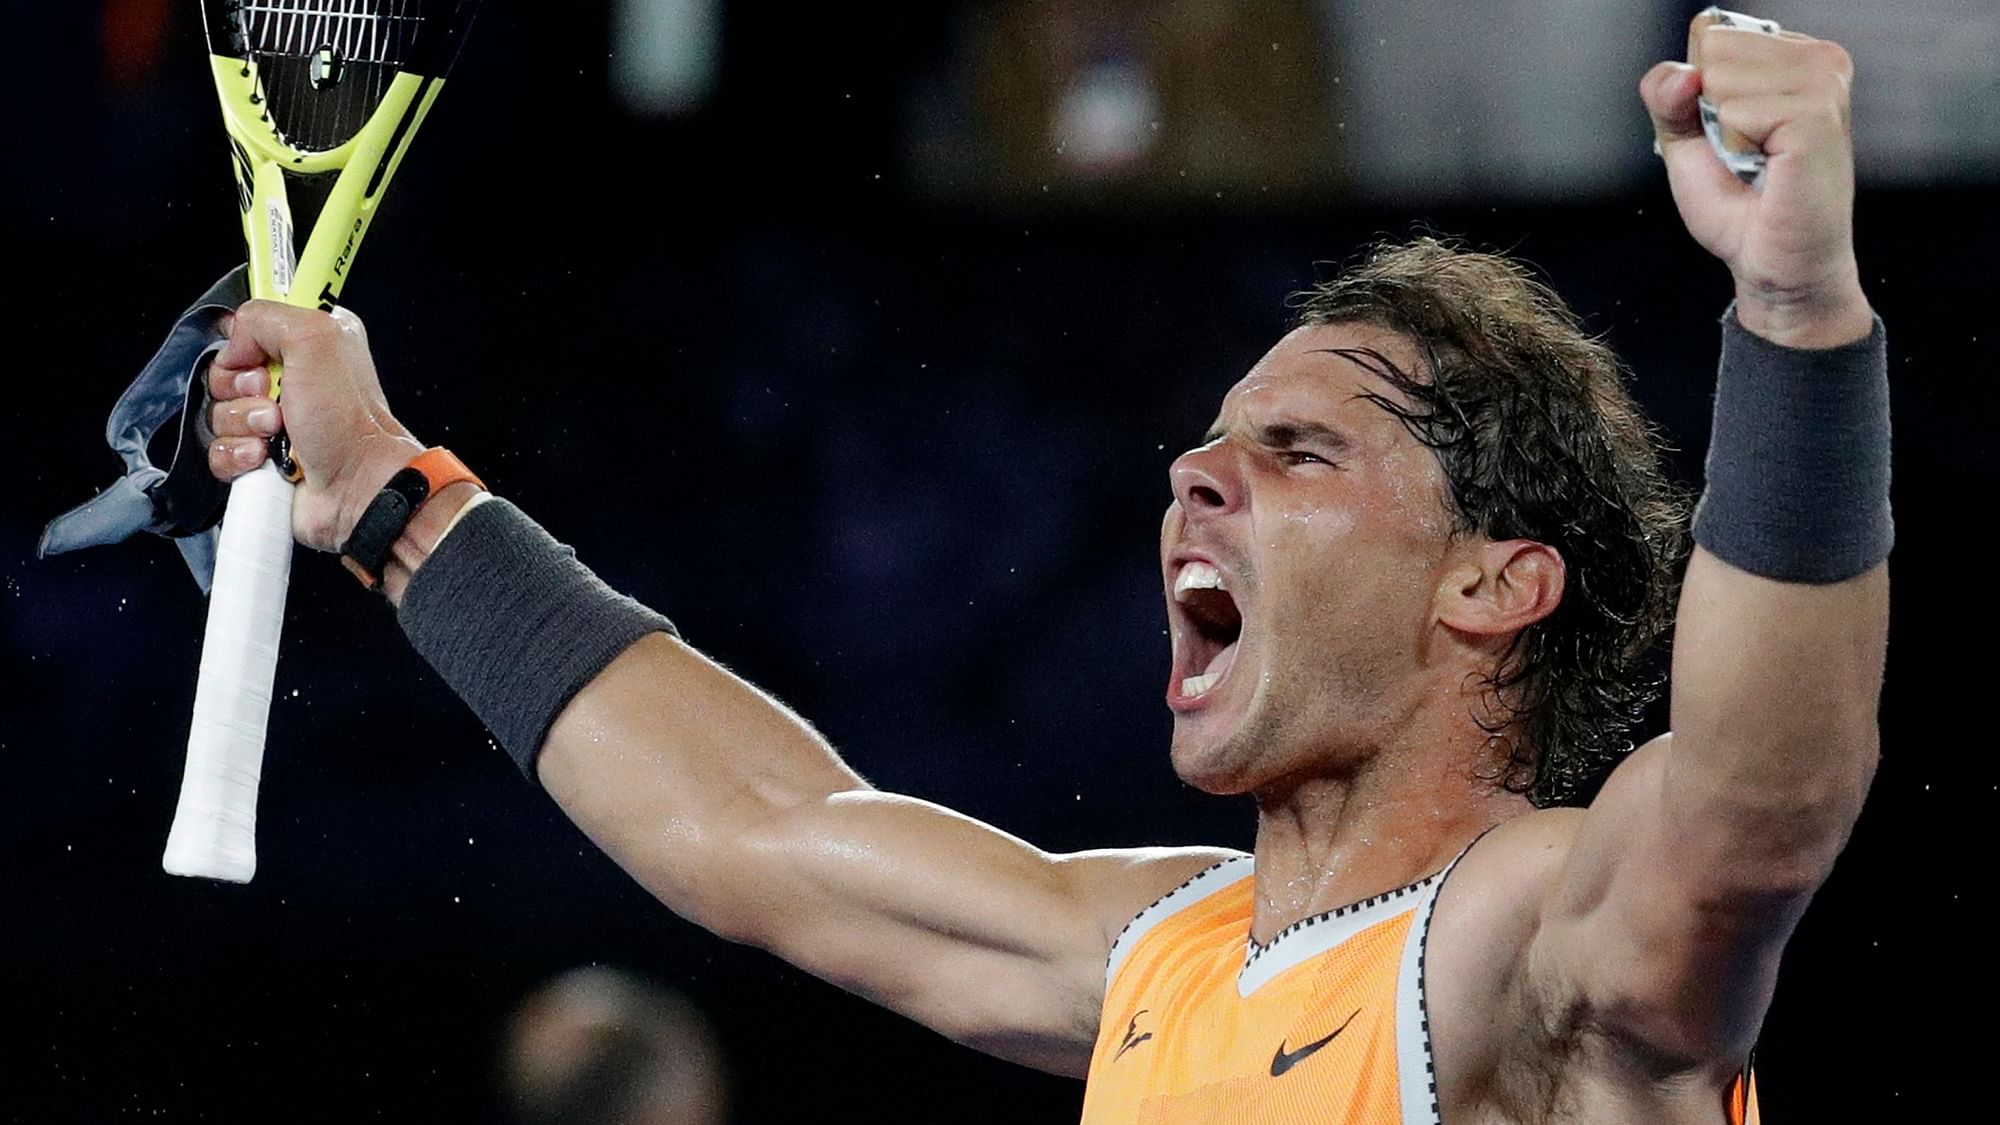 Rafael Nadal qualified for his fifth Australian Open final with a crushing 6-2, 6-4, 6-0 win over Greek prodigy Stefanos Tsitsipas.